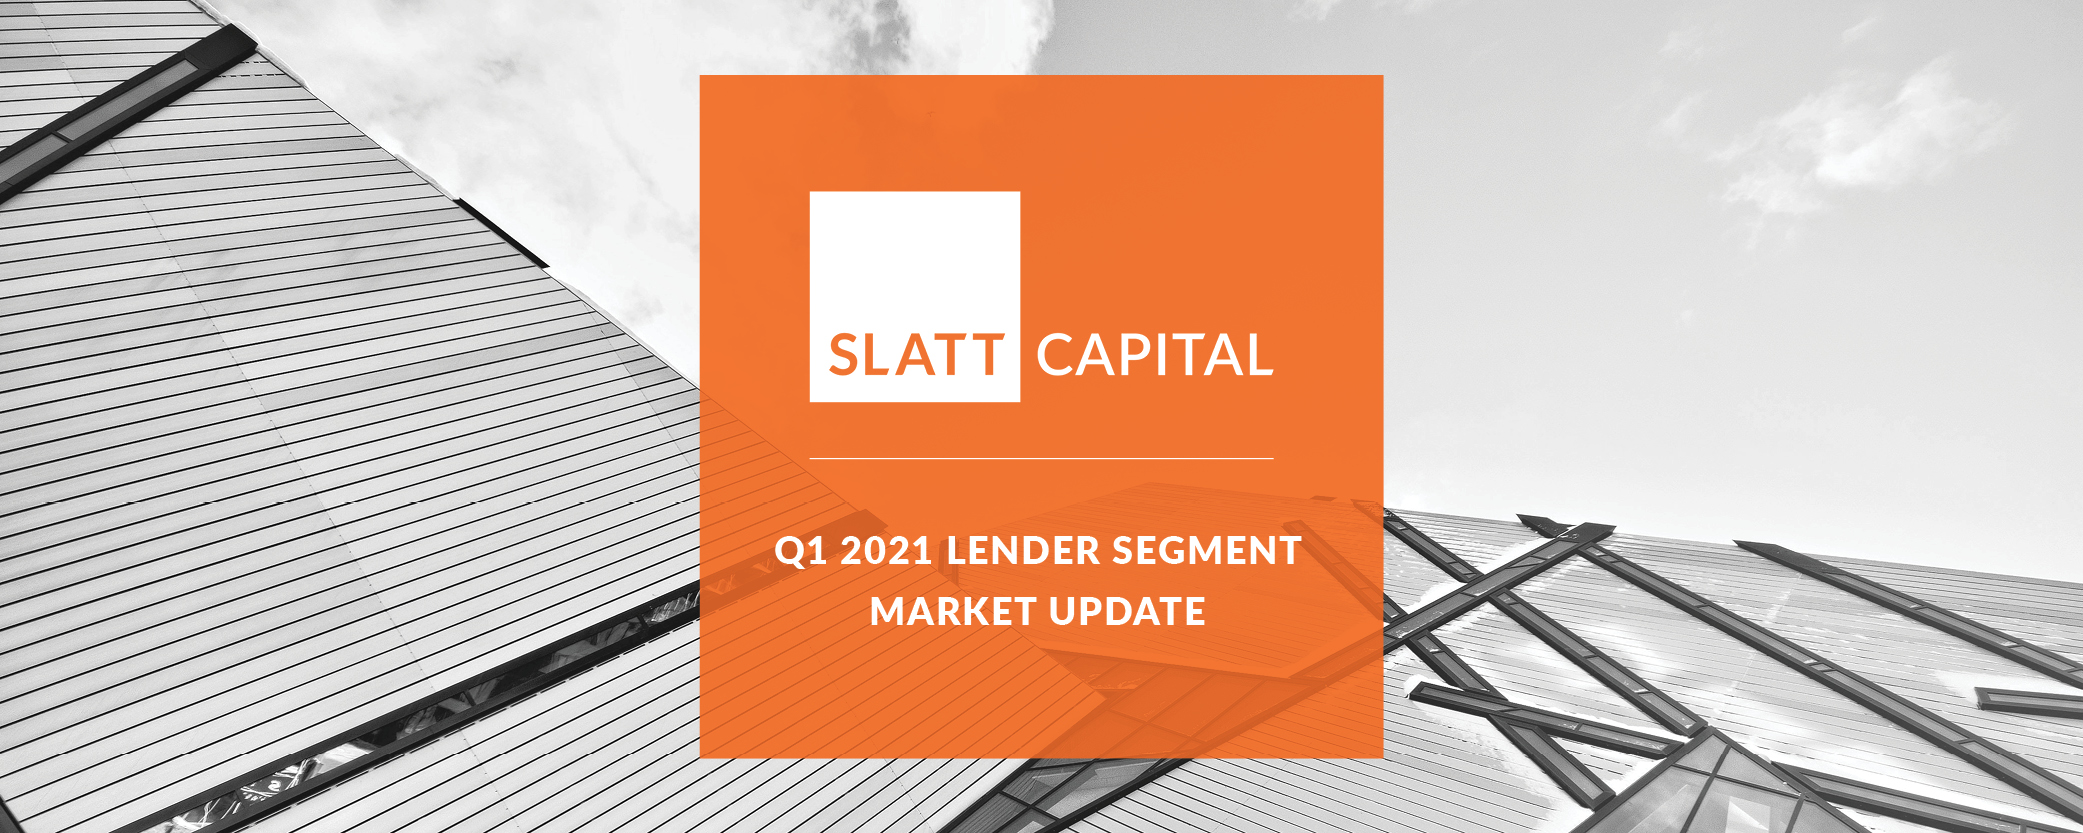 Our mortgage bankers provide the best updates for all things finance related here is the Q1 2021 lender segment market update